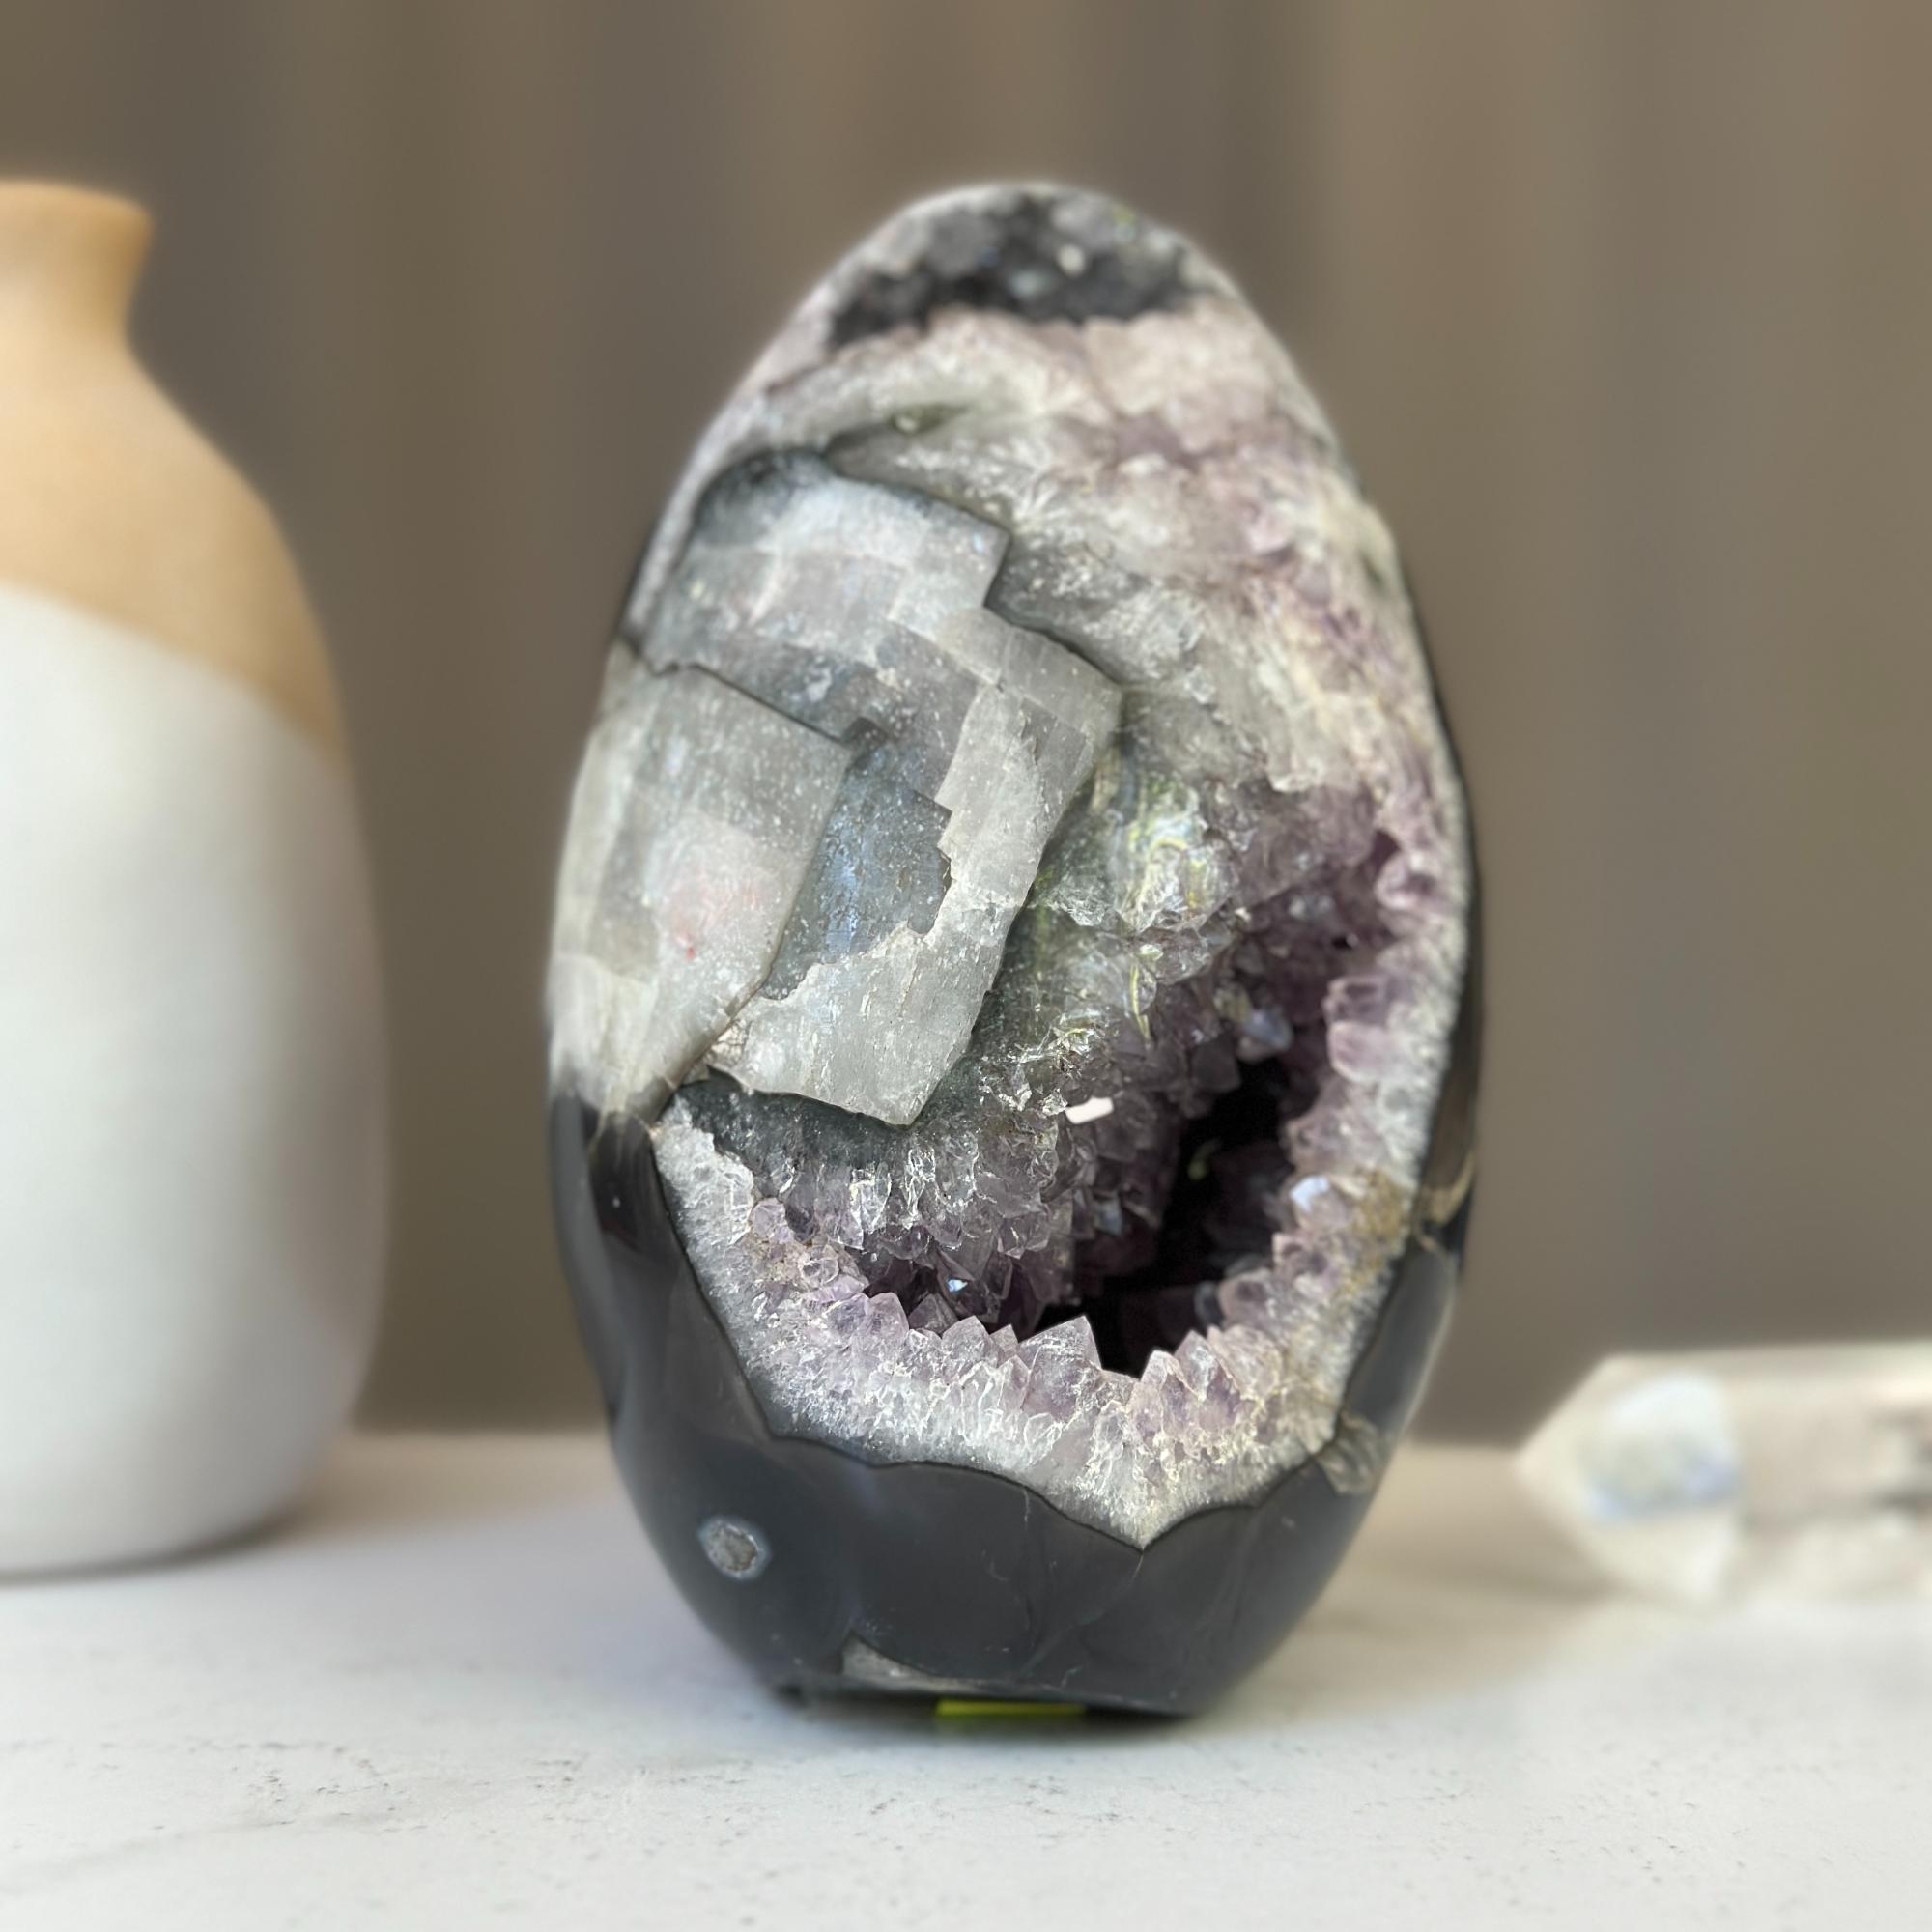 Incredible Crystal Amethyst and Agate Stone, Egg shaped crystal piece, AAA quality Oval Full polished Crystal, Unique Amethyst Cave